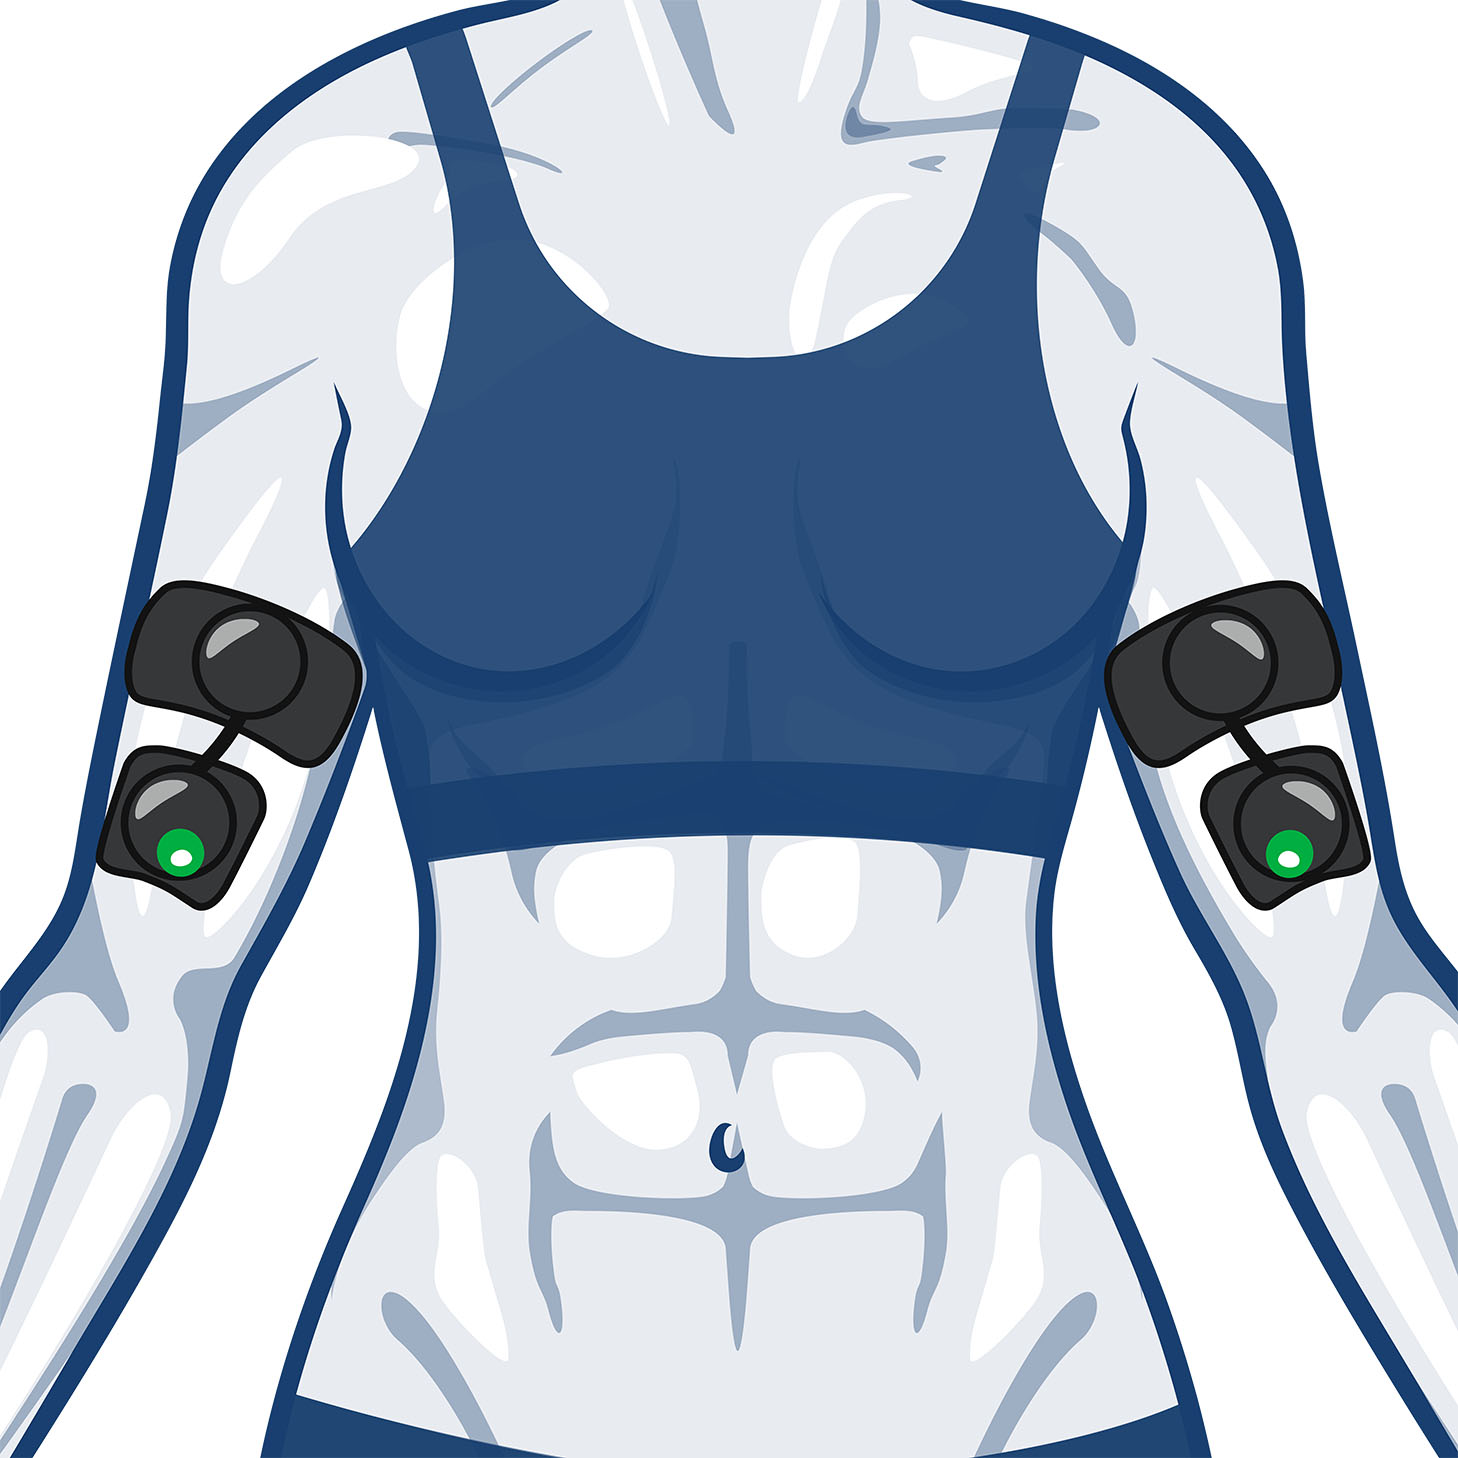 Abdominal Muscles Electrode Placement for Compex Muscle